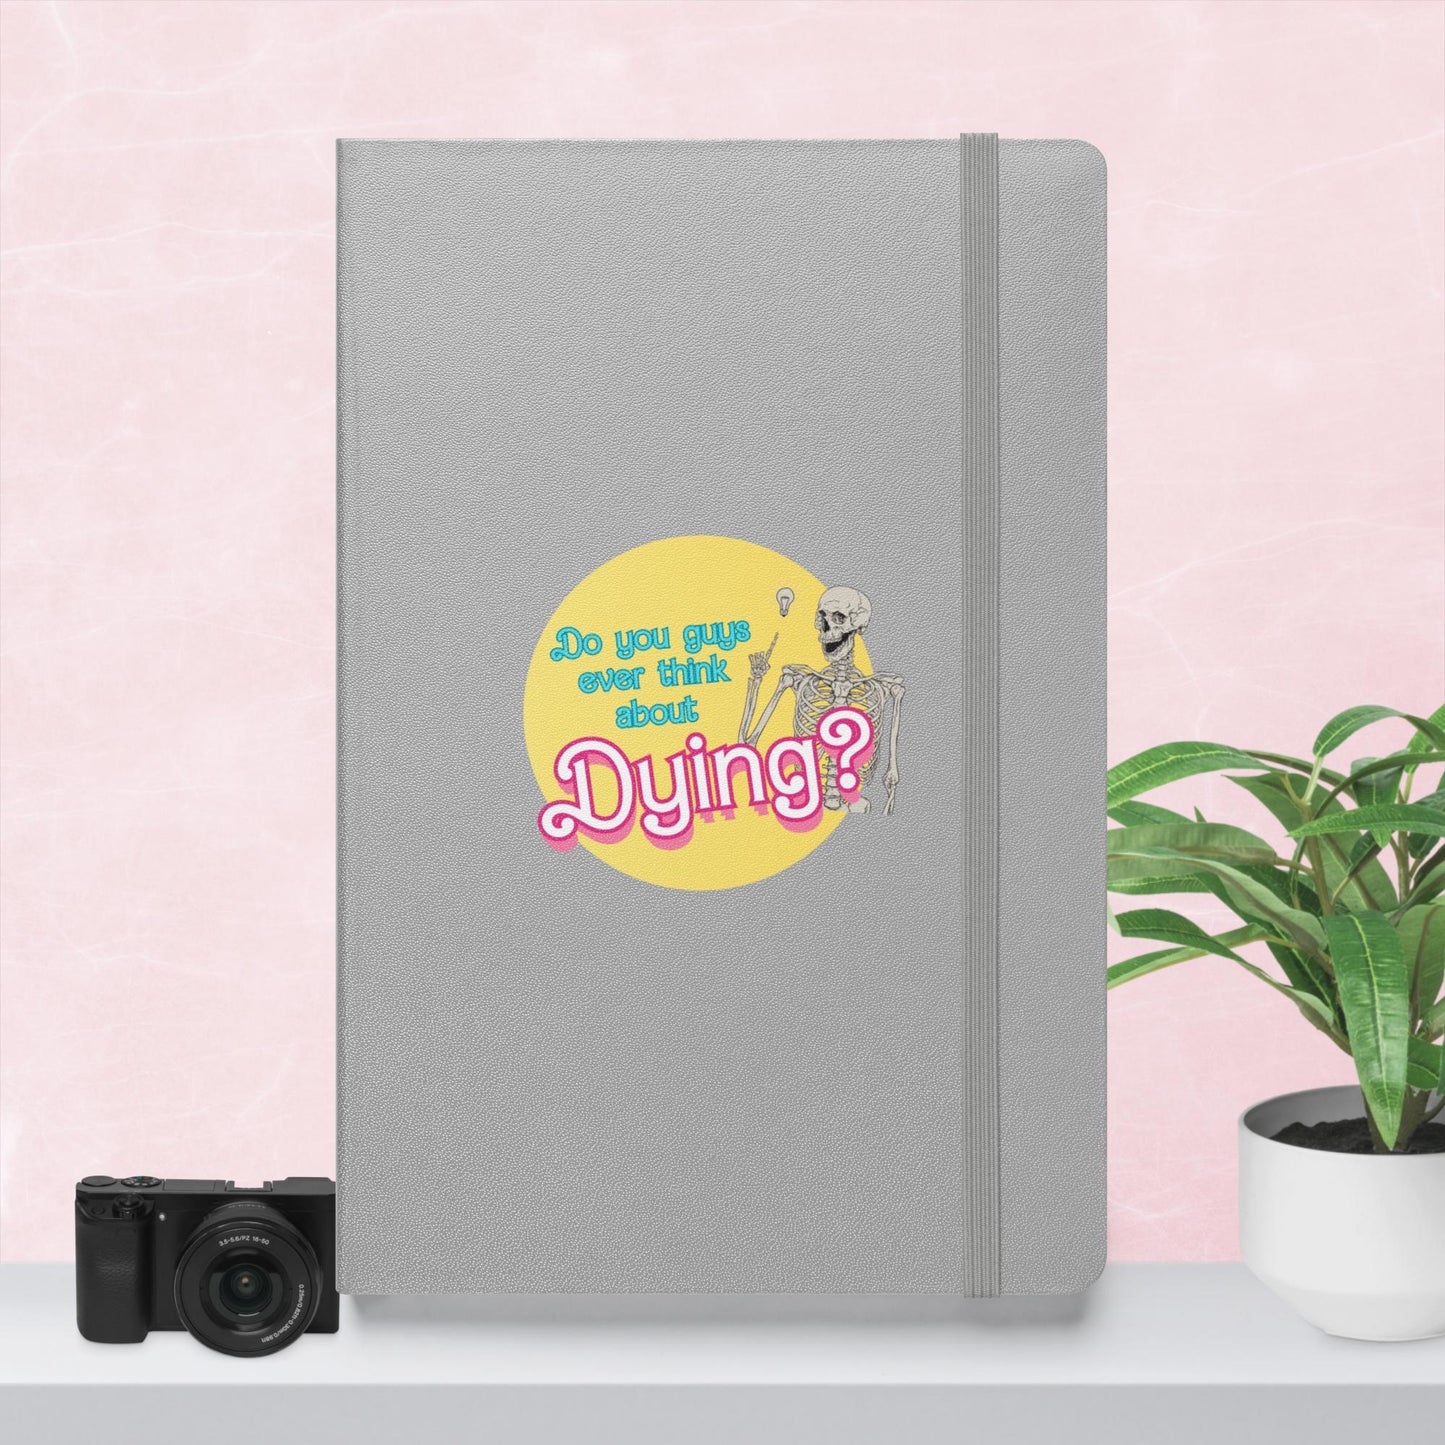 Ever Think about dying? Hardcover bound notebook